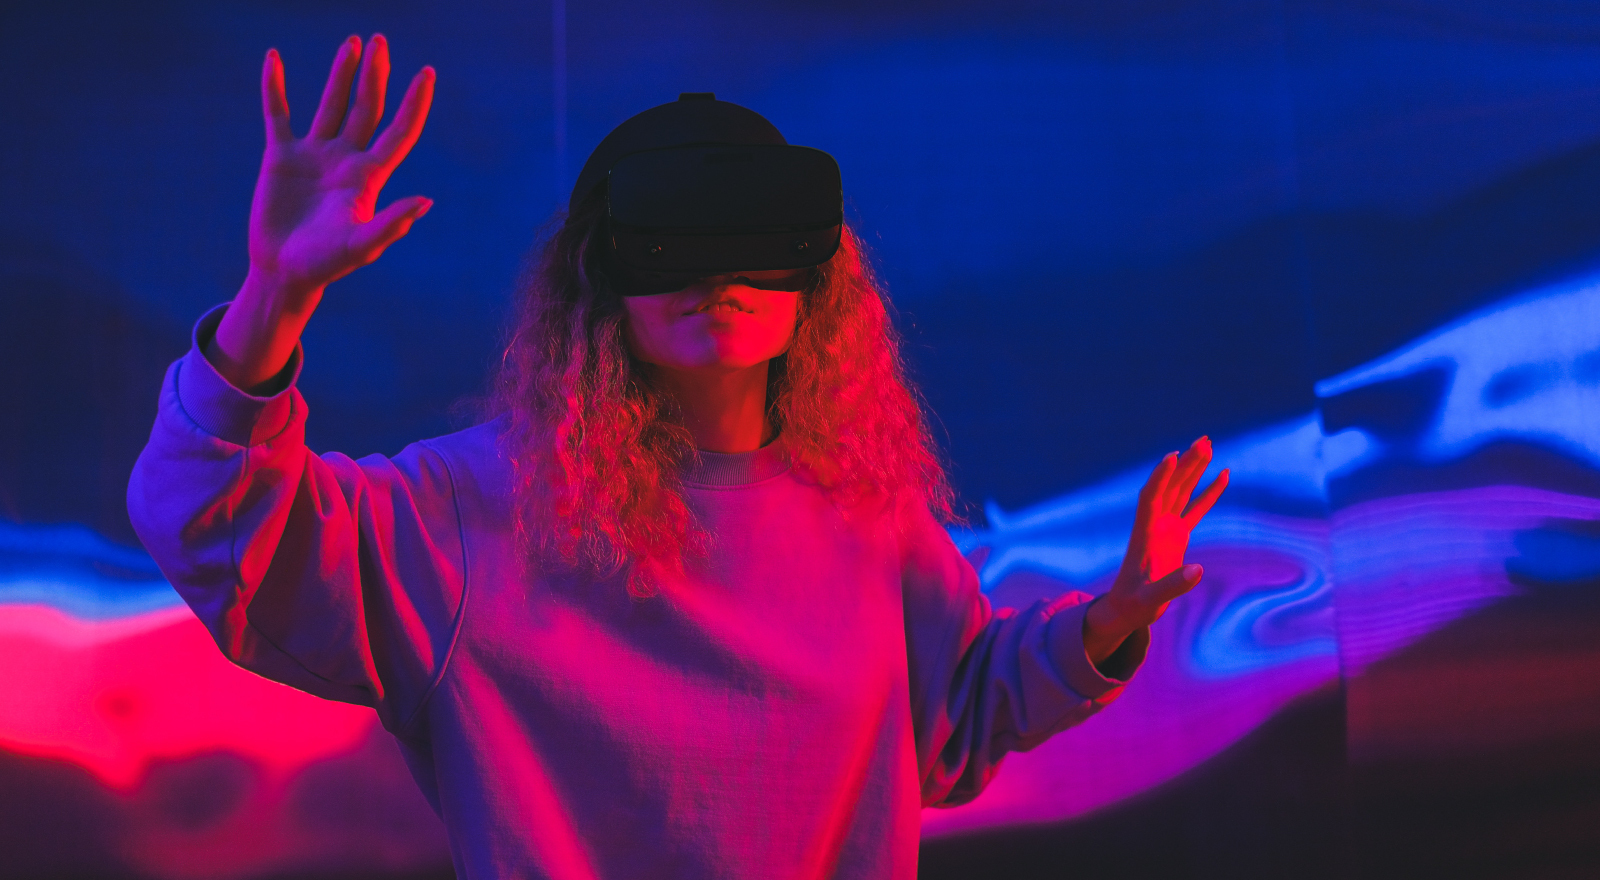 How the Metaverse is Changing the Way We Experience Reality